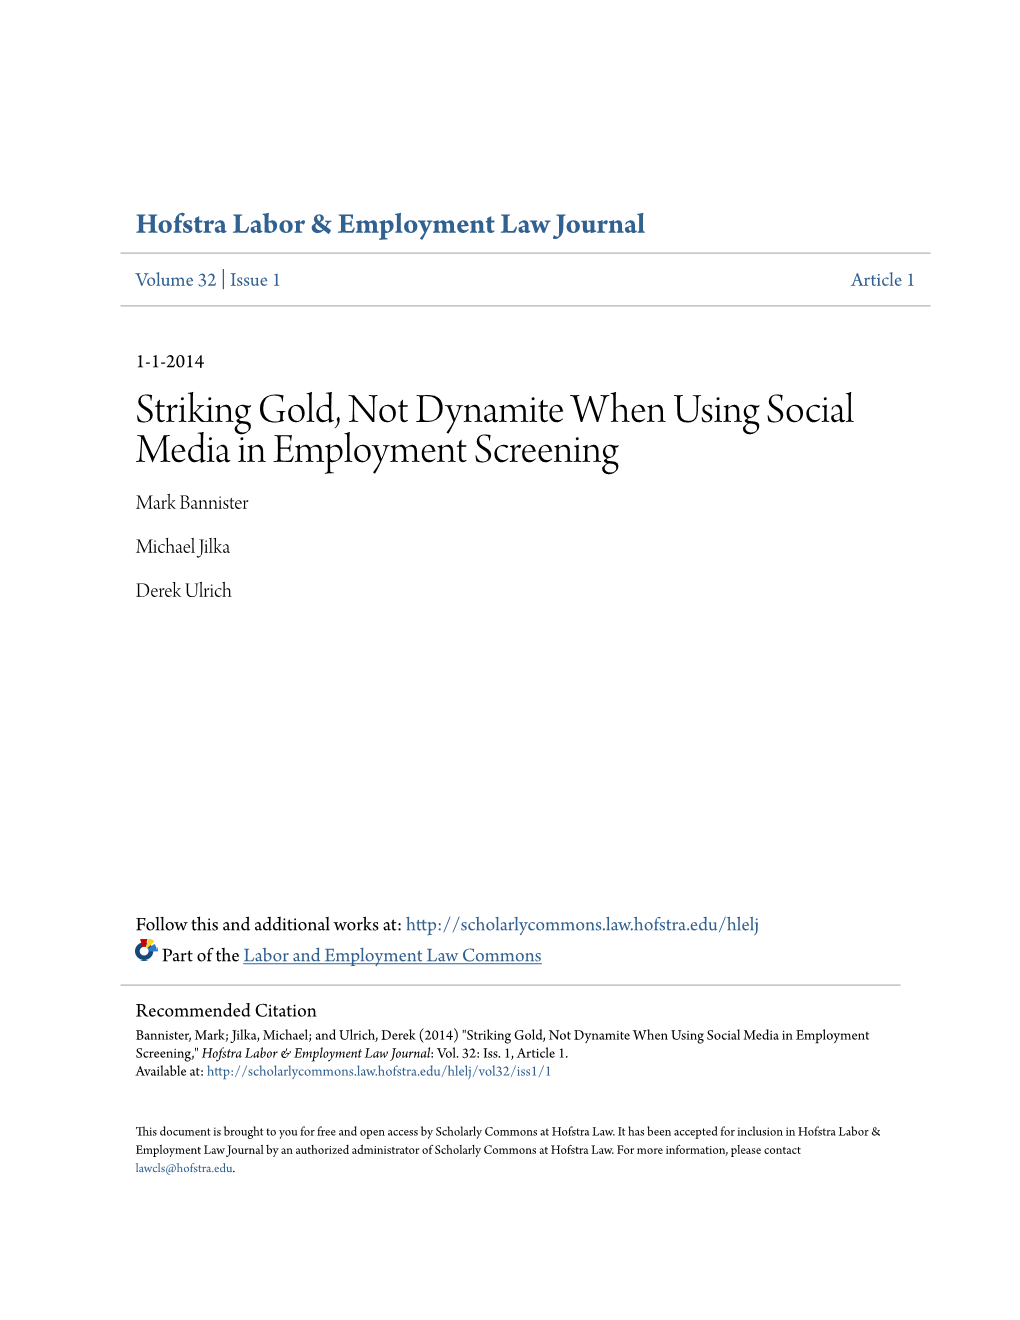 Striking Gold, Not Dynamite When Using Social Media in Employment Screening Mark Bannister